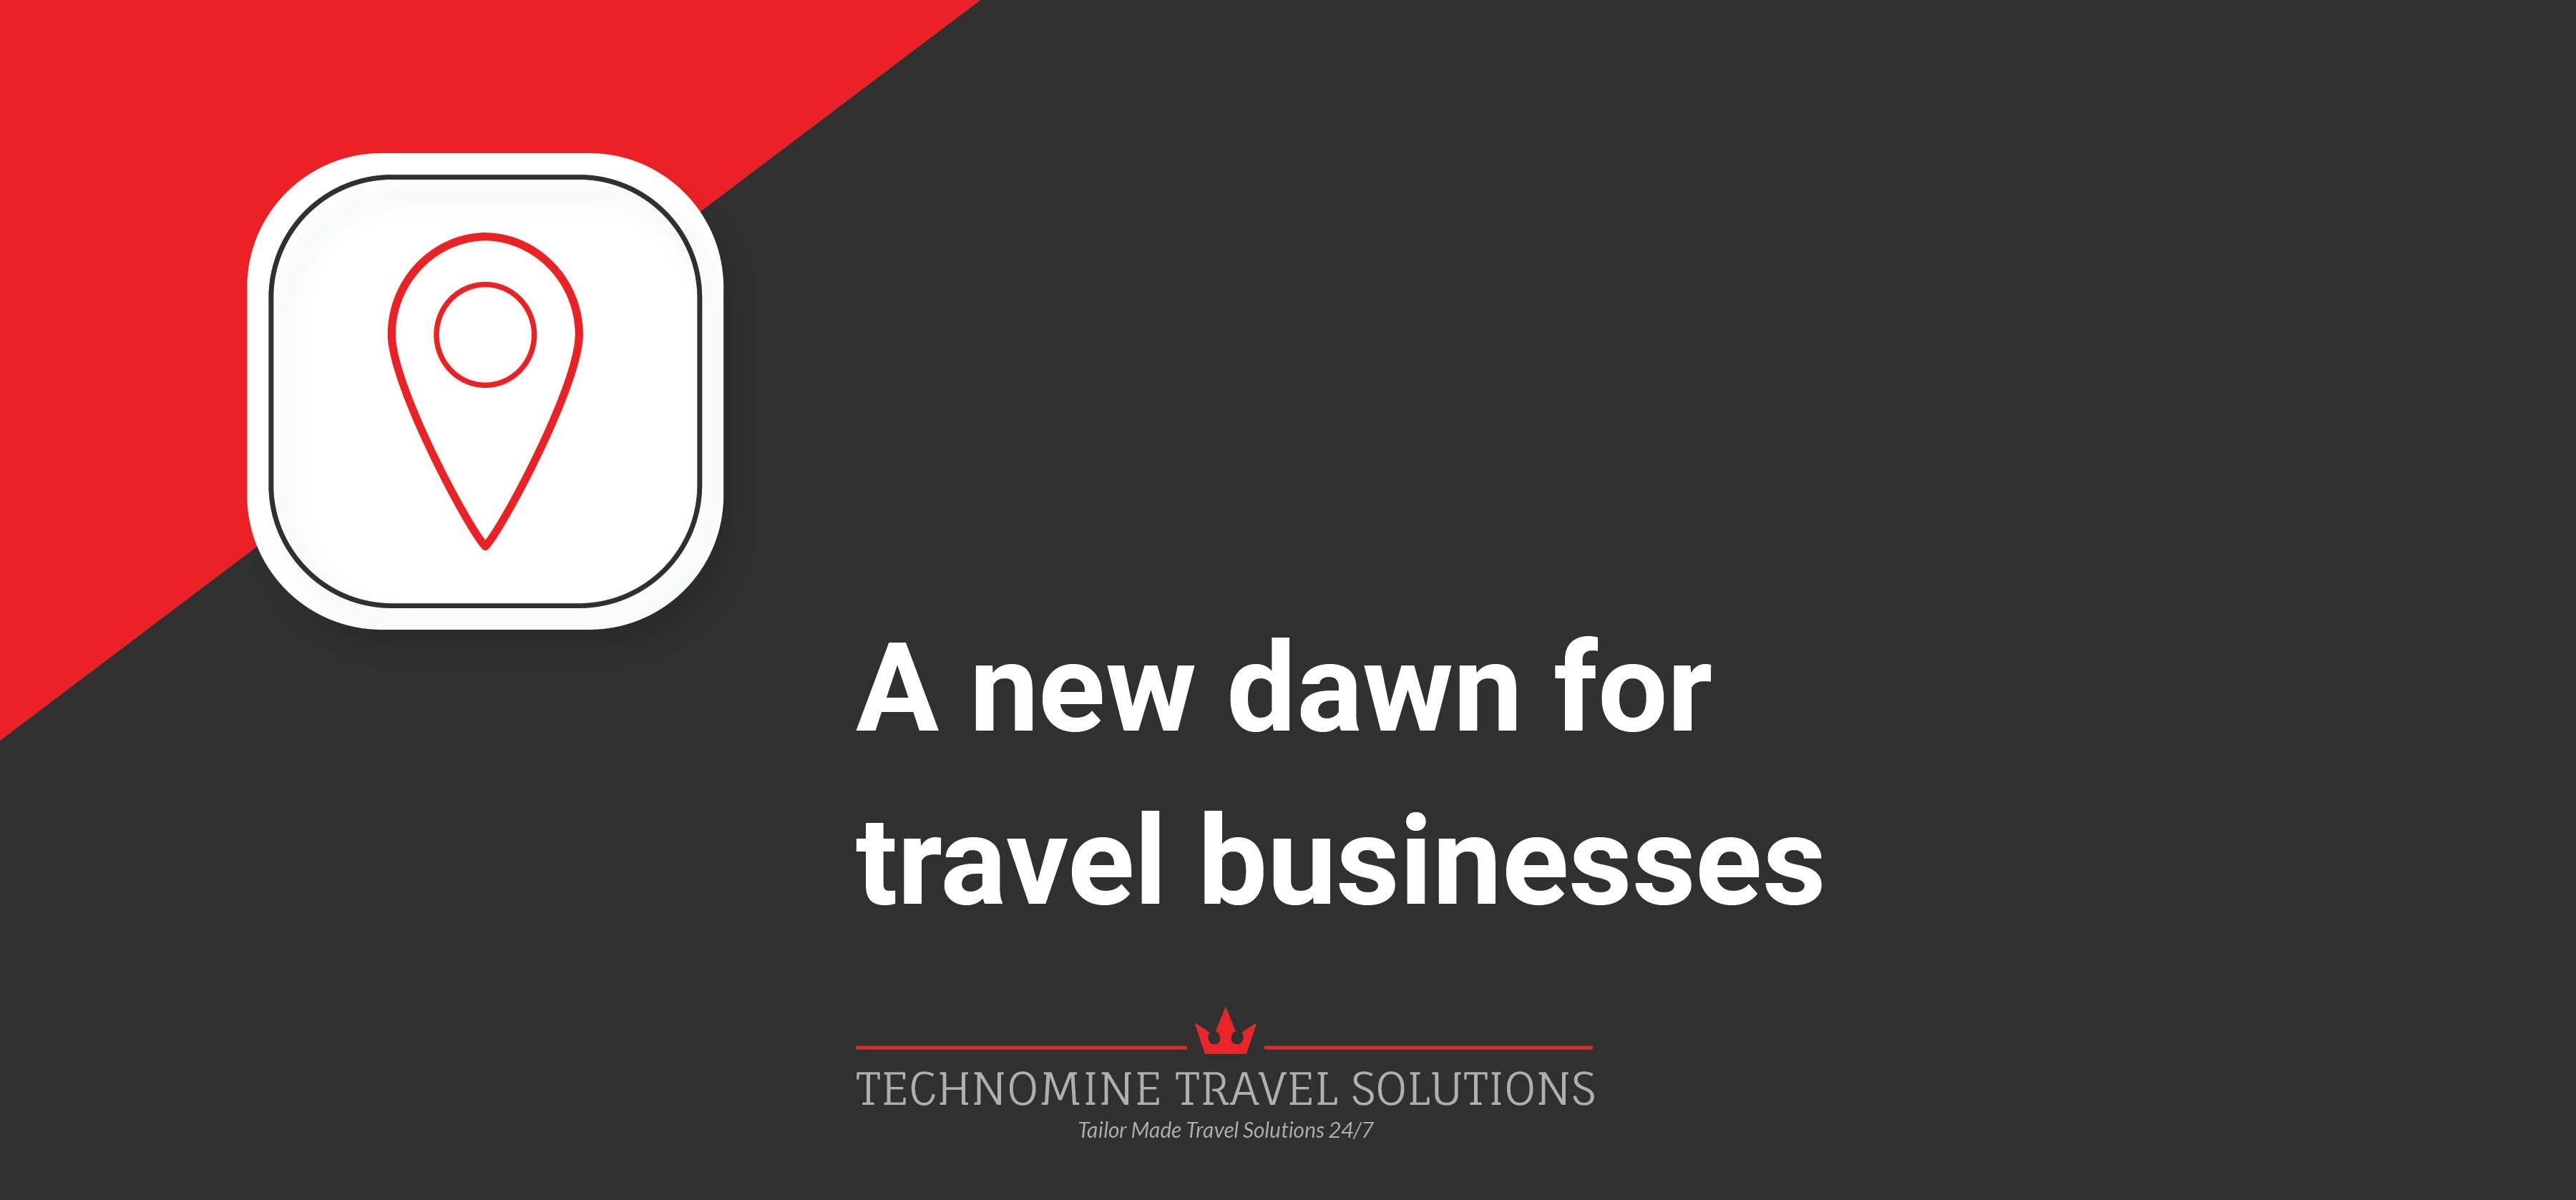 A new dawn for travel businesses